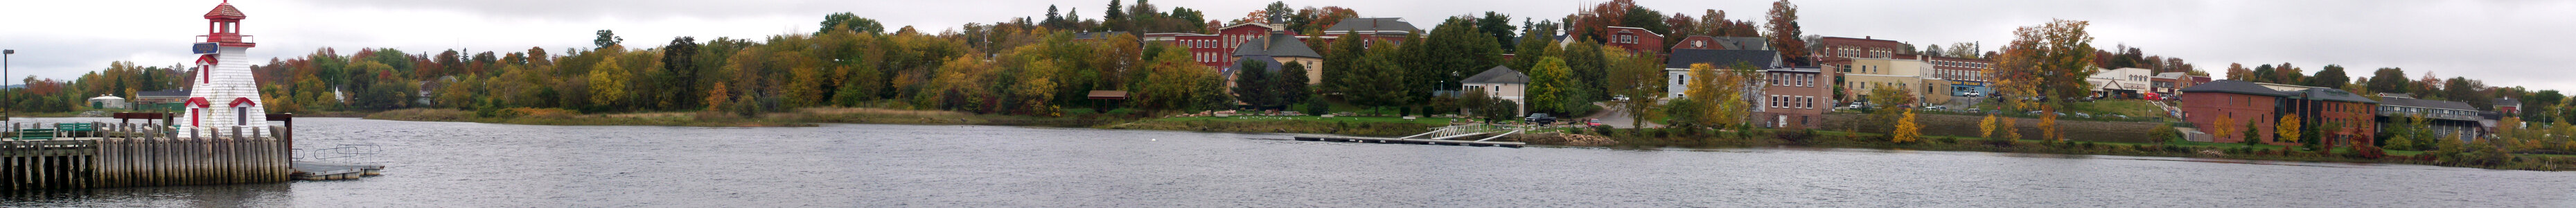 Calais viewed from St. Stephen across the St. Croix River in Maine photo